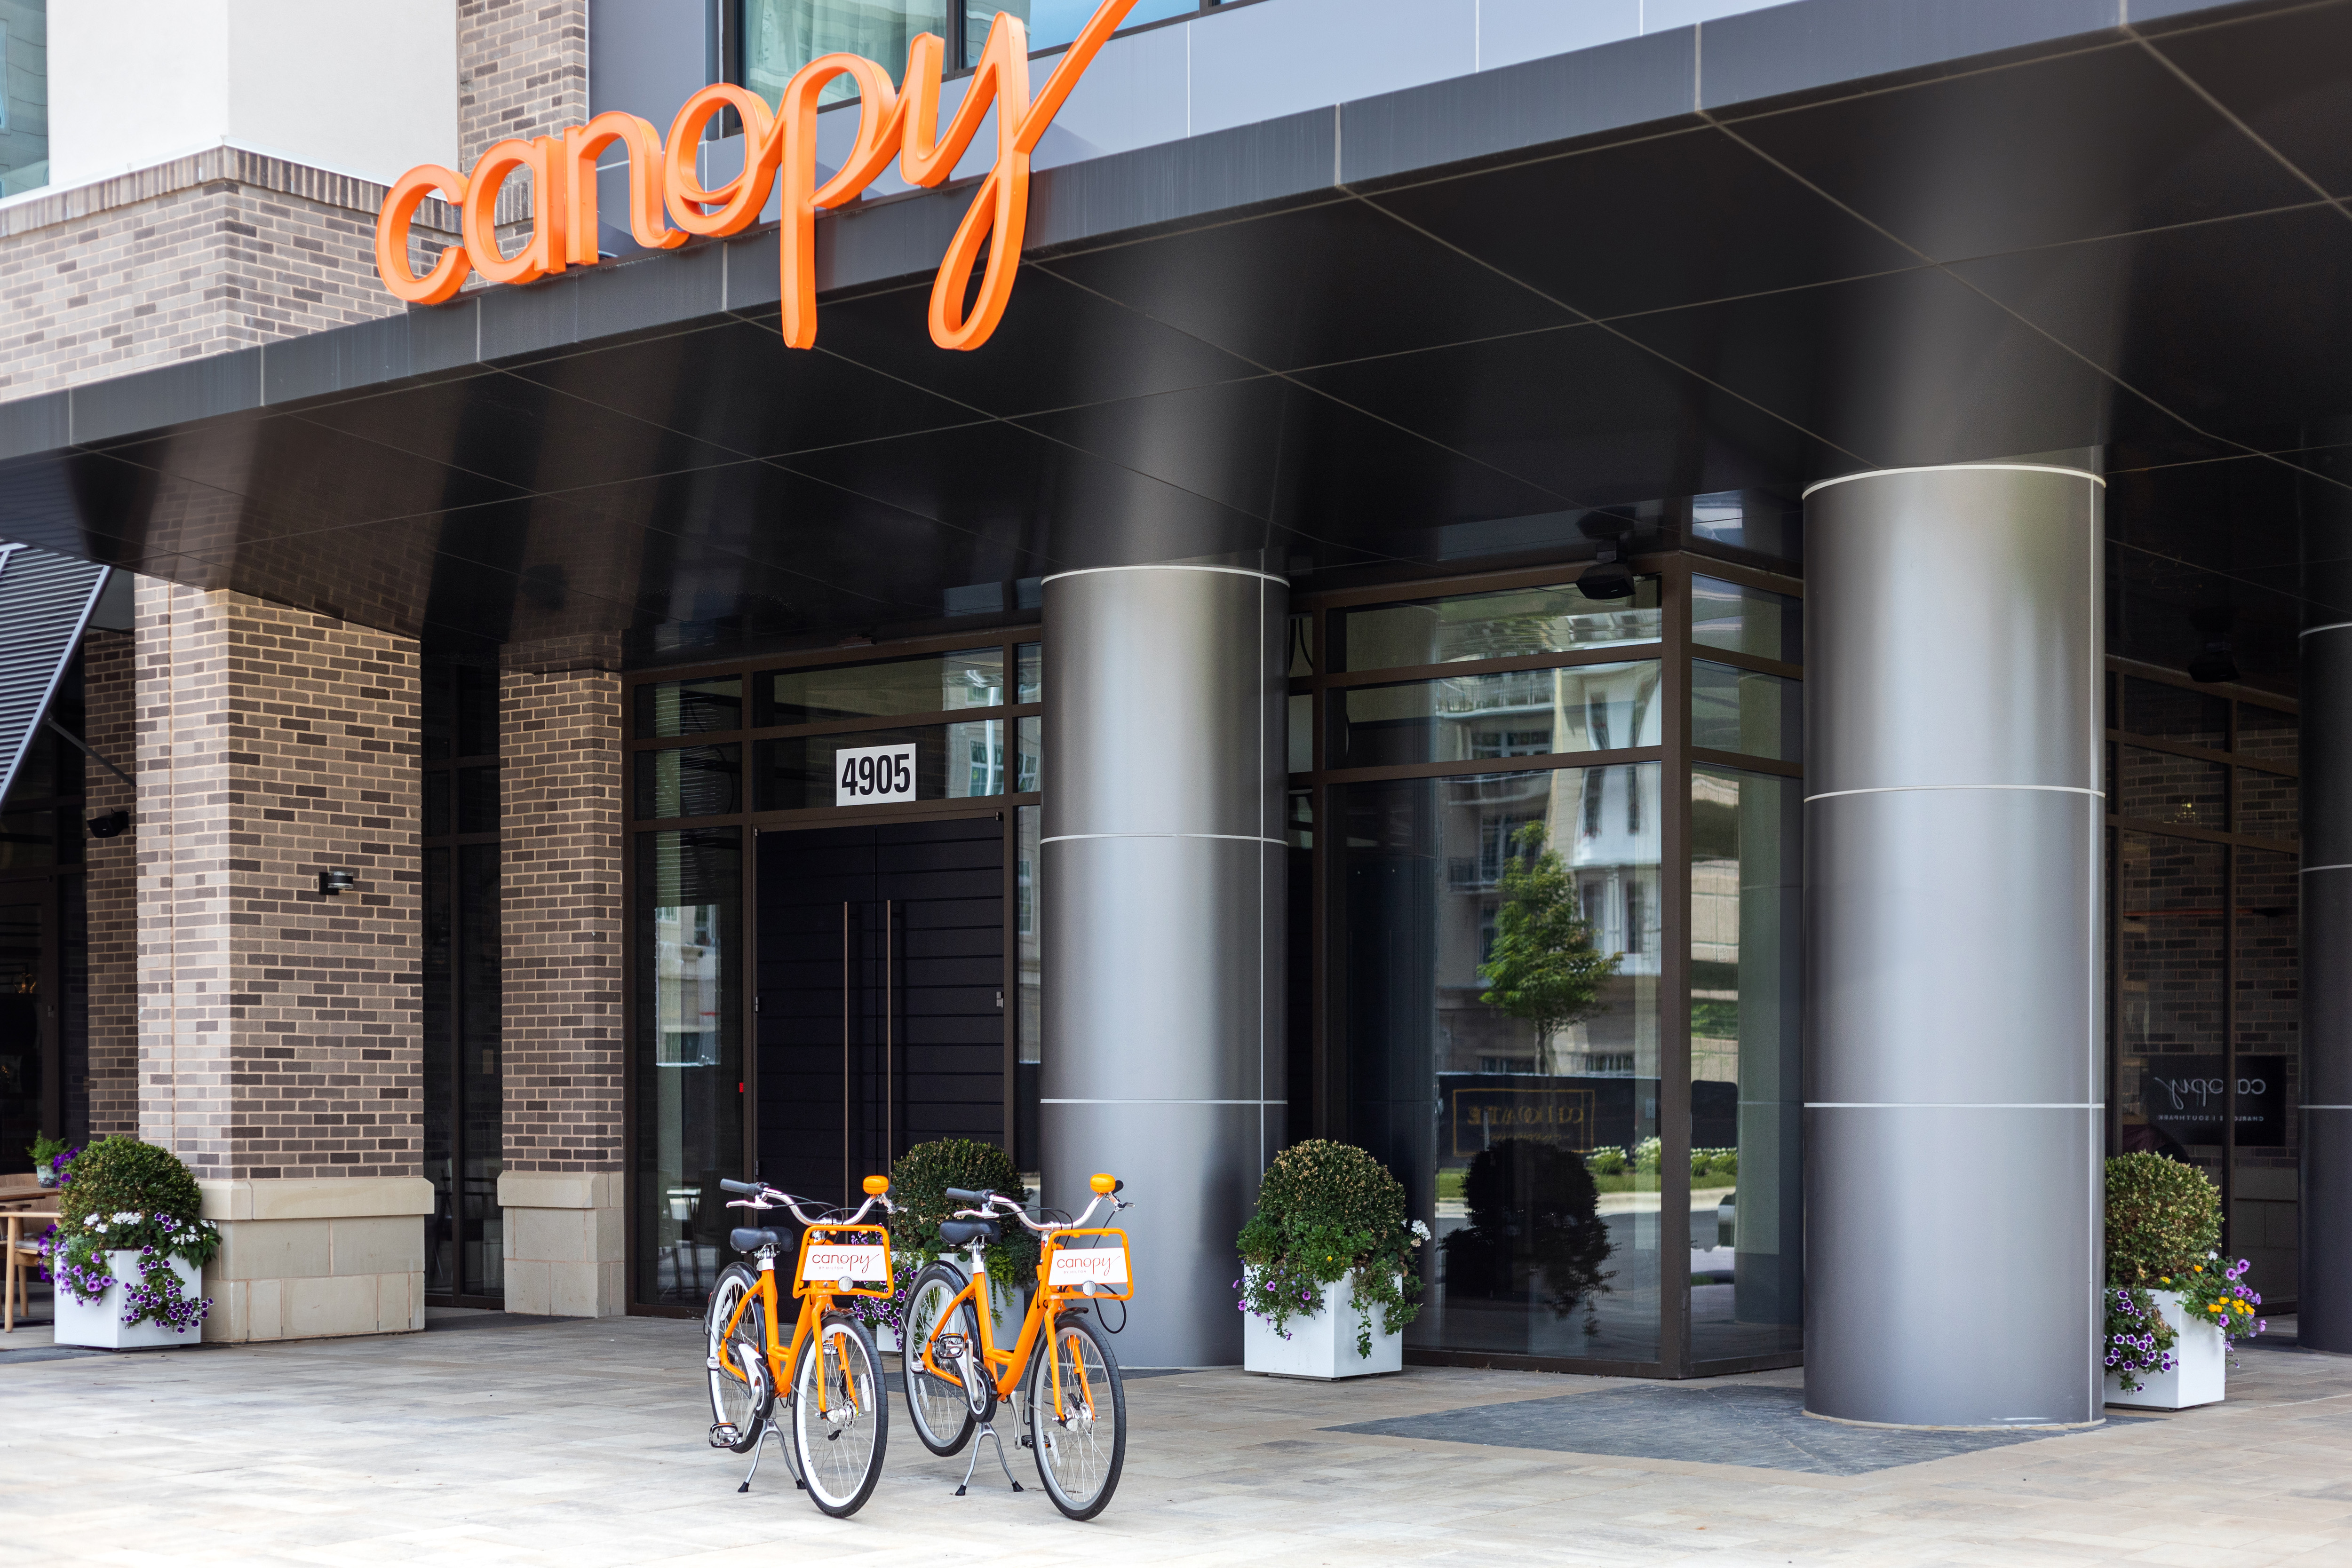 Hotel entrance with bicycles